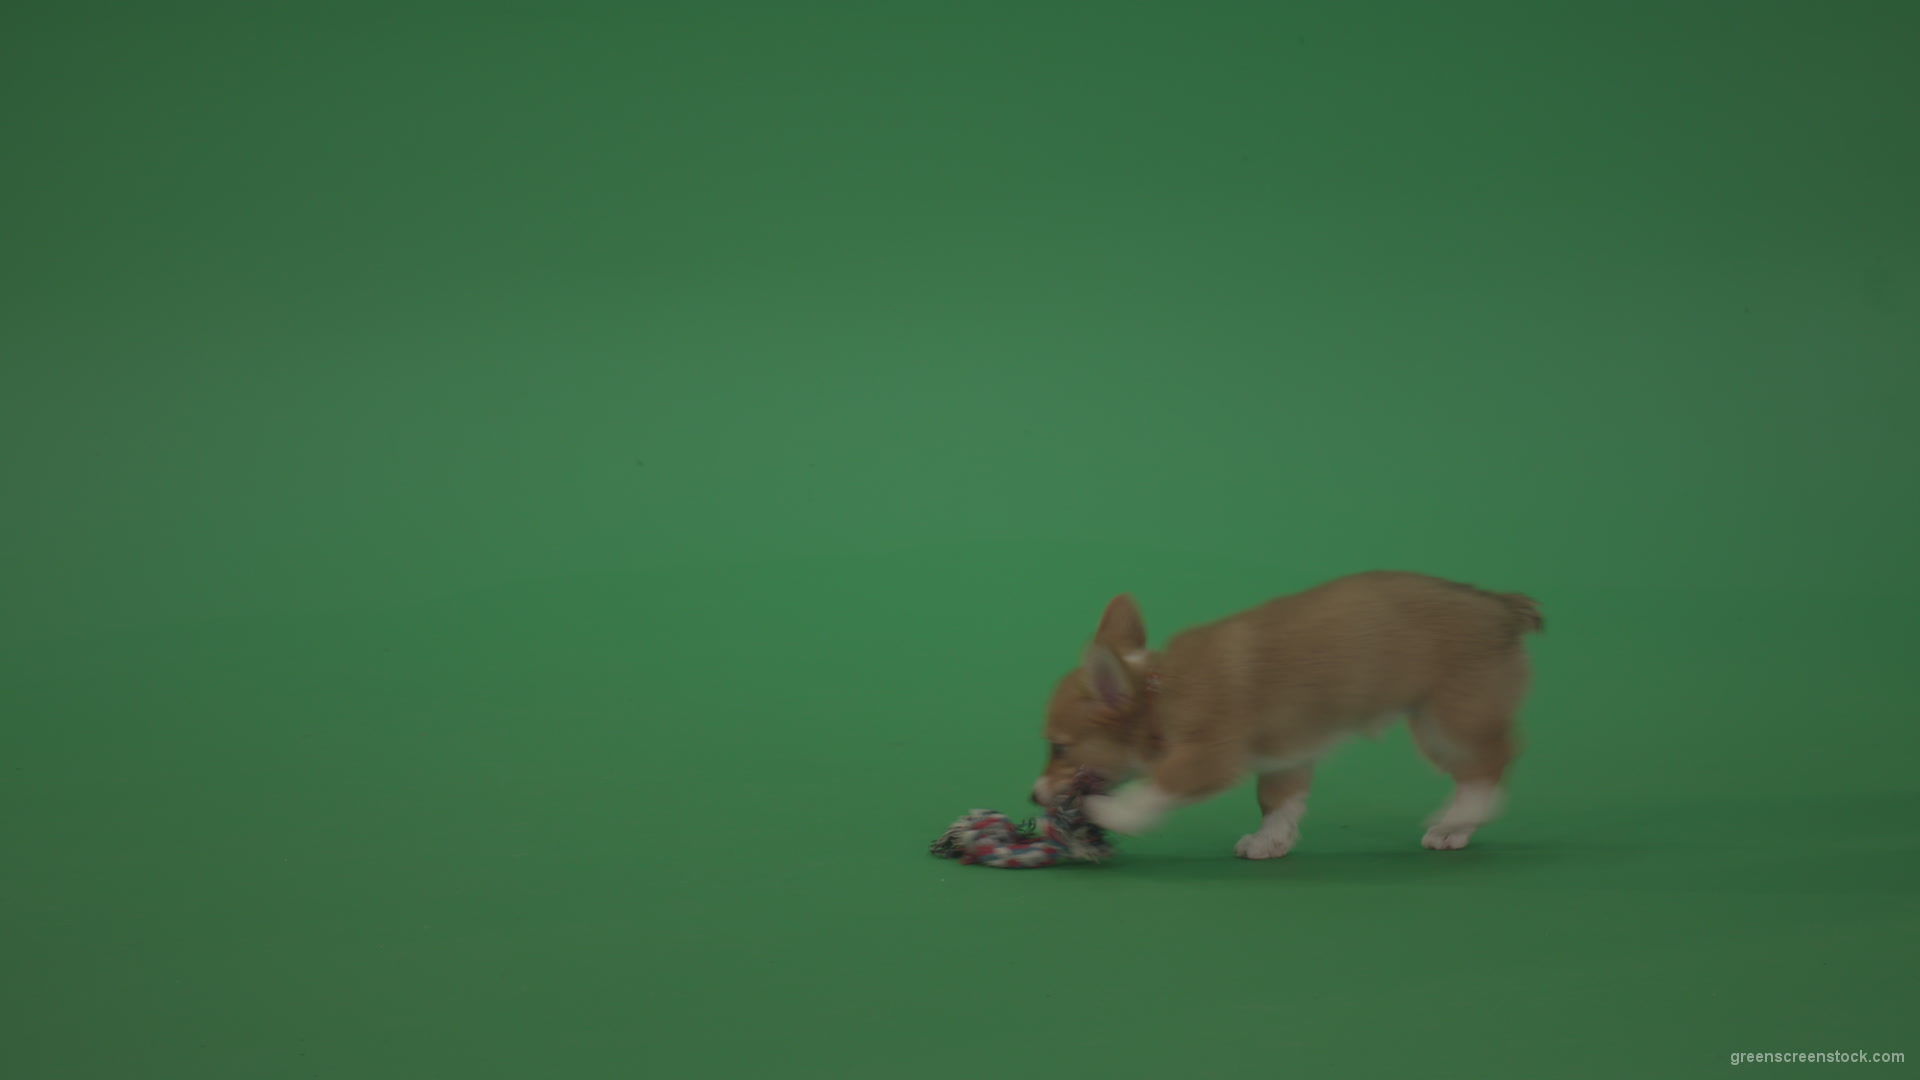 Small-toy-Korgi-welsh-dog-play-with-doll-on-green-screen-isolated_002 Green Screen Stock